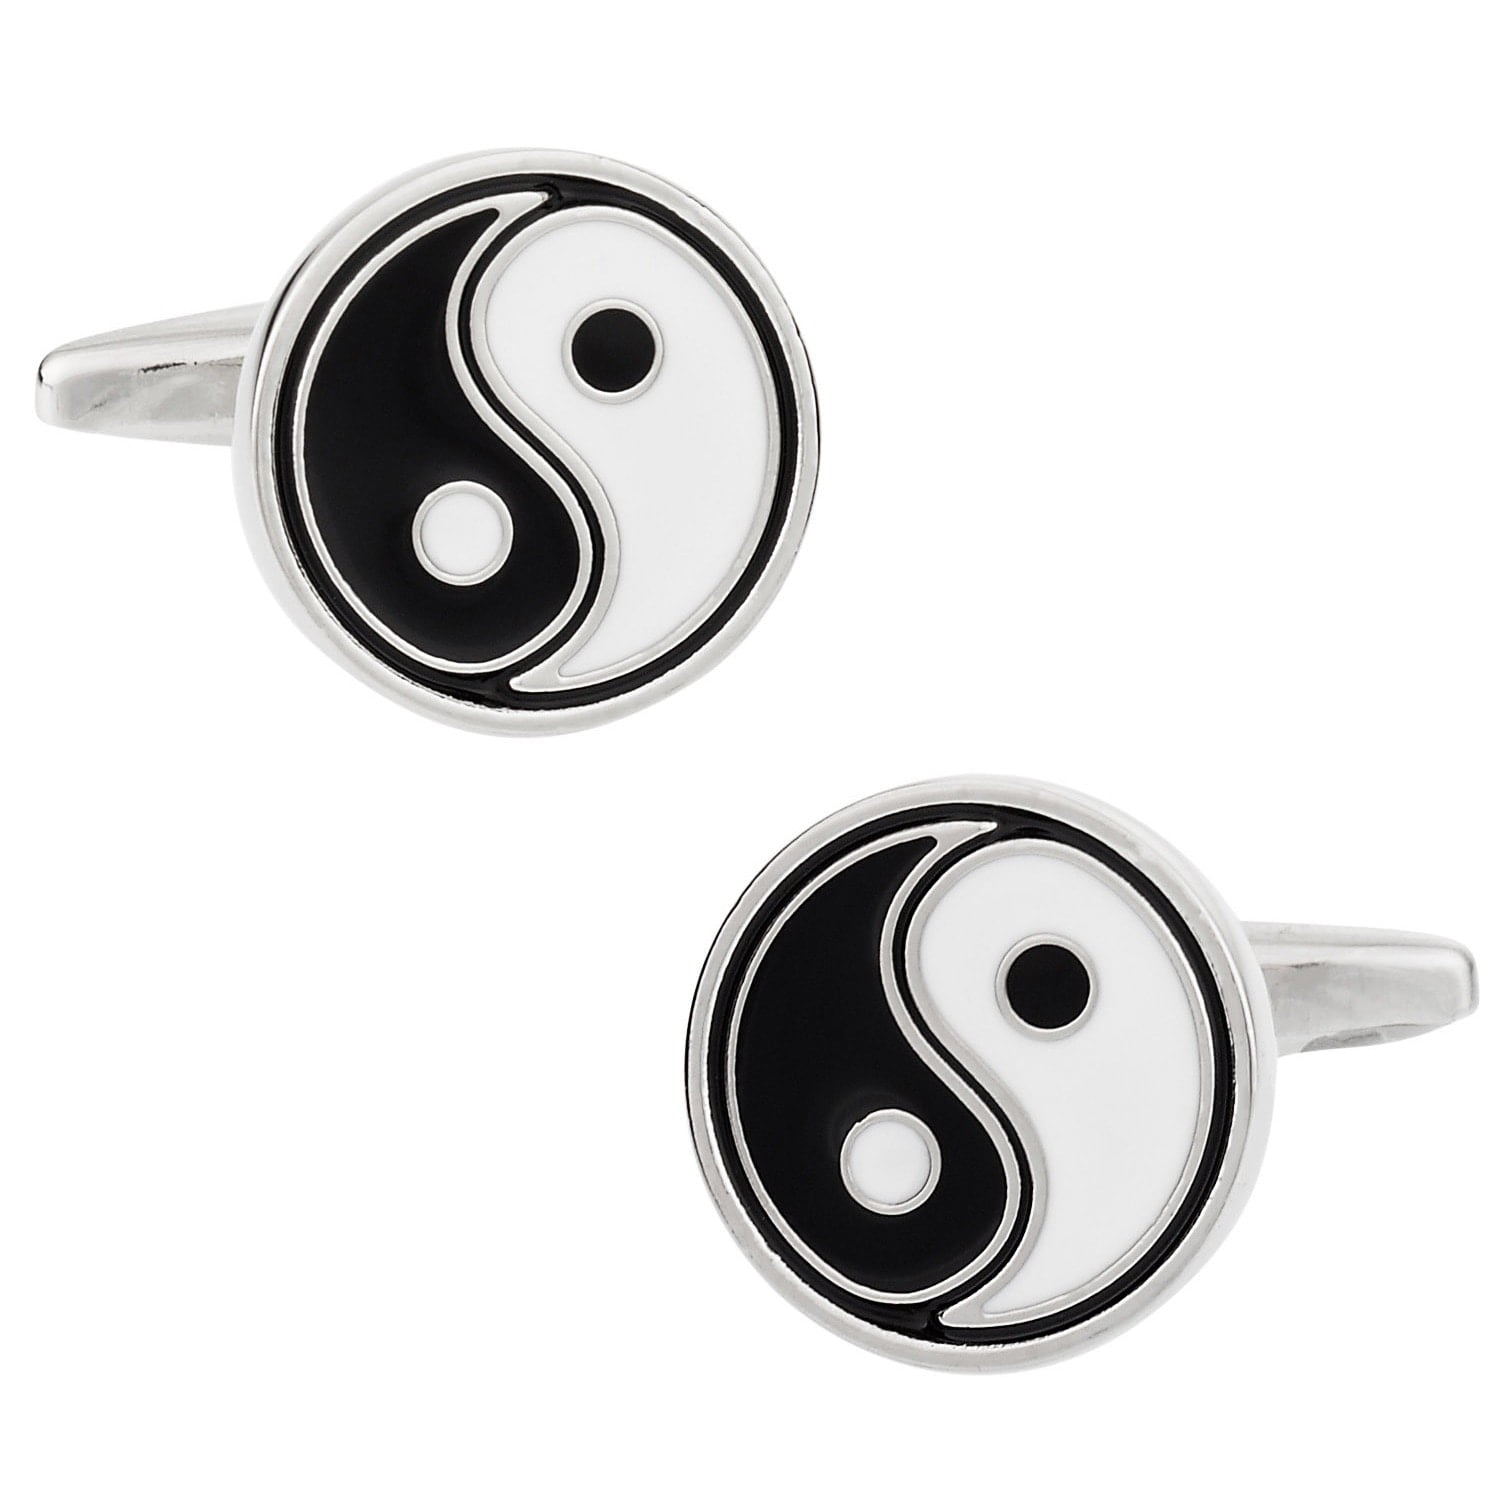 Men Tie Clip Lovely Yin Yang Cats Stainless Tie Pins for Business Wedding Shirts Tie Clips Include Gift Box 